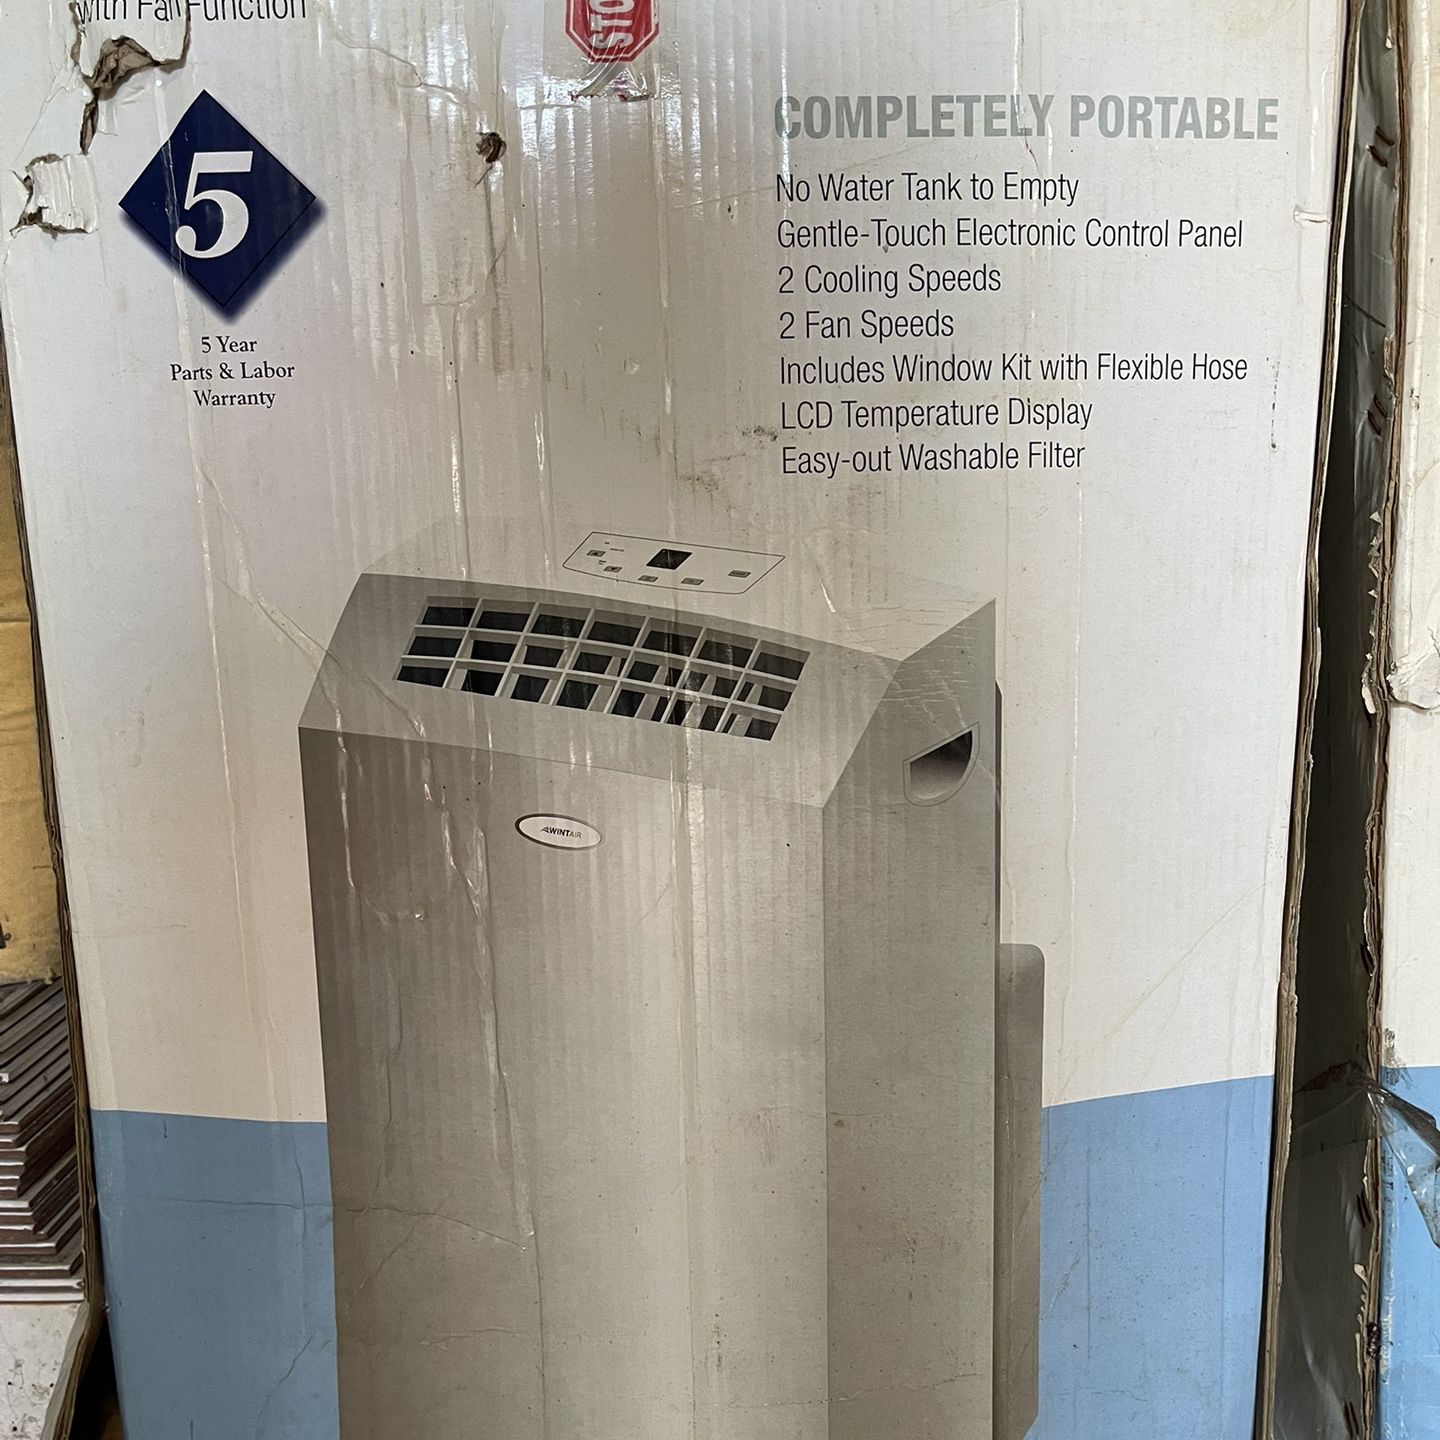 Two Portable Air Conditioners 8,000 BTU